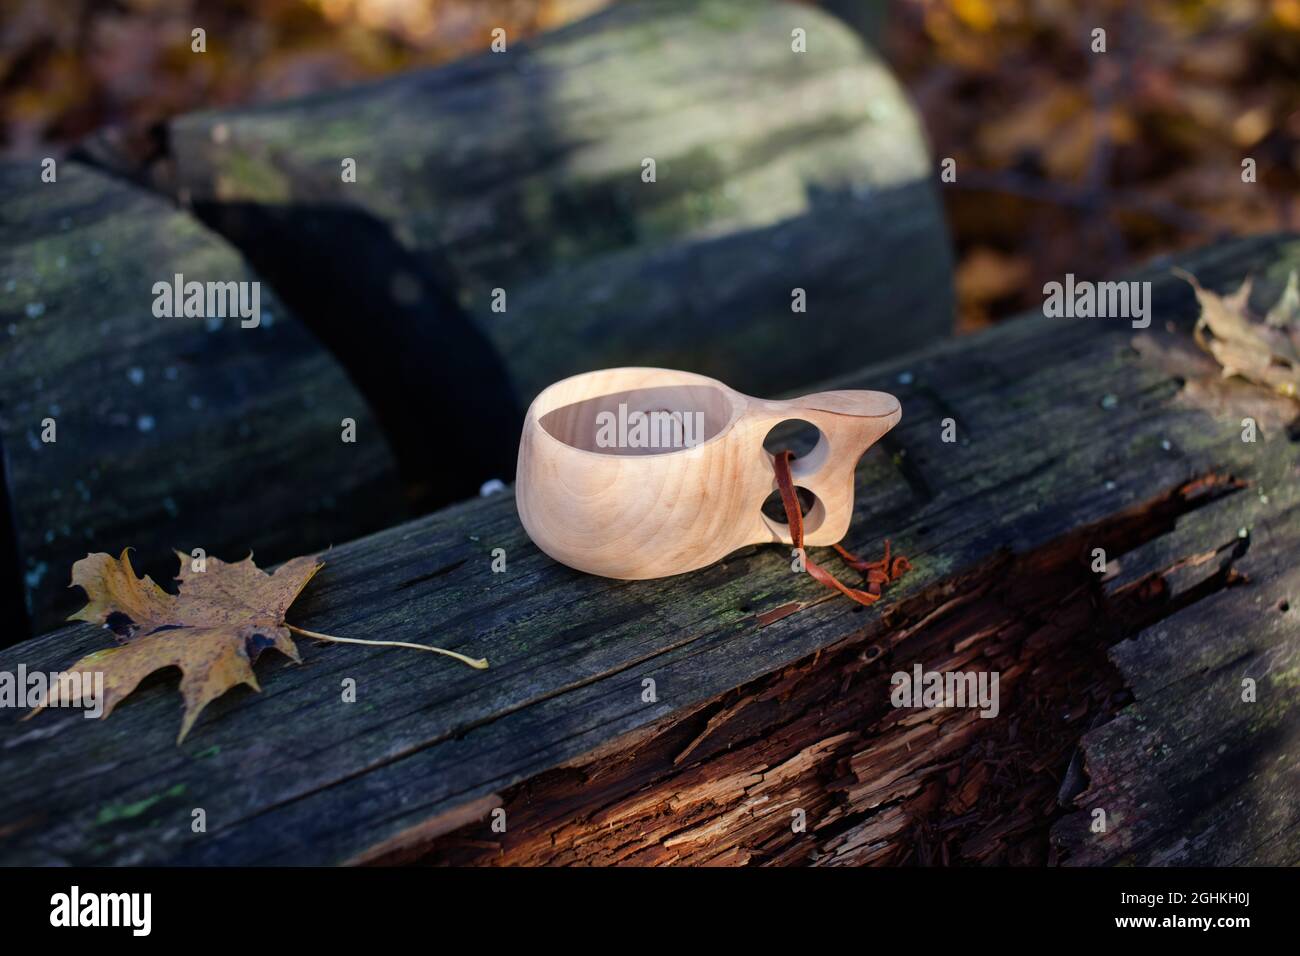 Closeup of an empty wooden cup in a forest in the fall, with fallen leaves in the background. Stock Photo